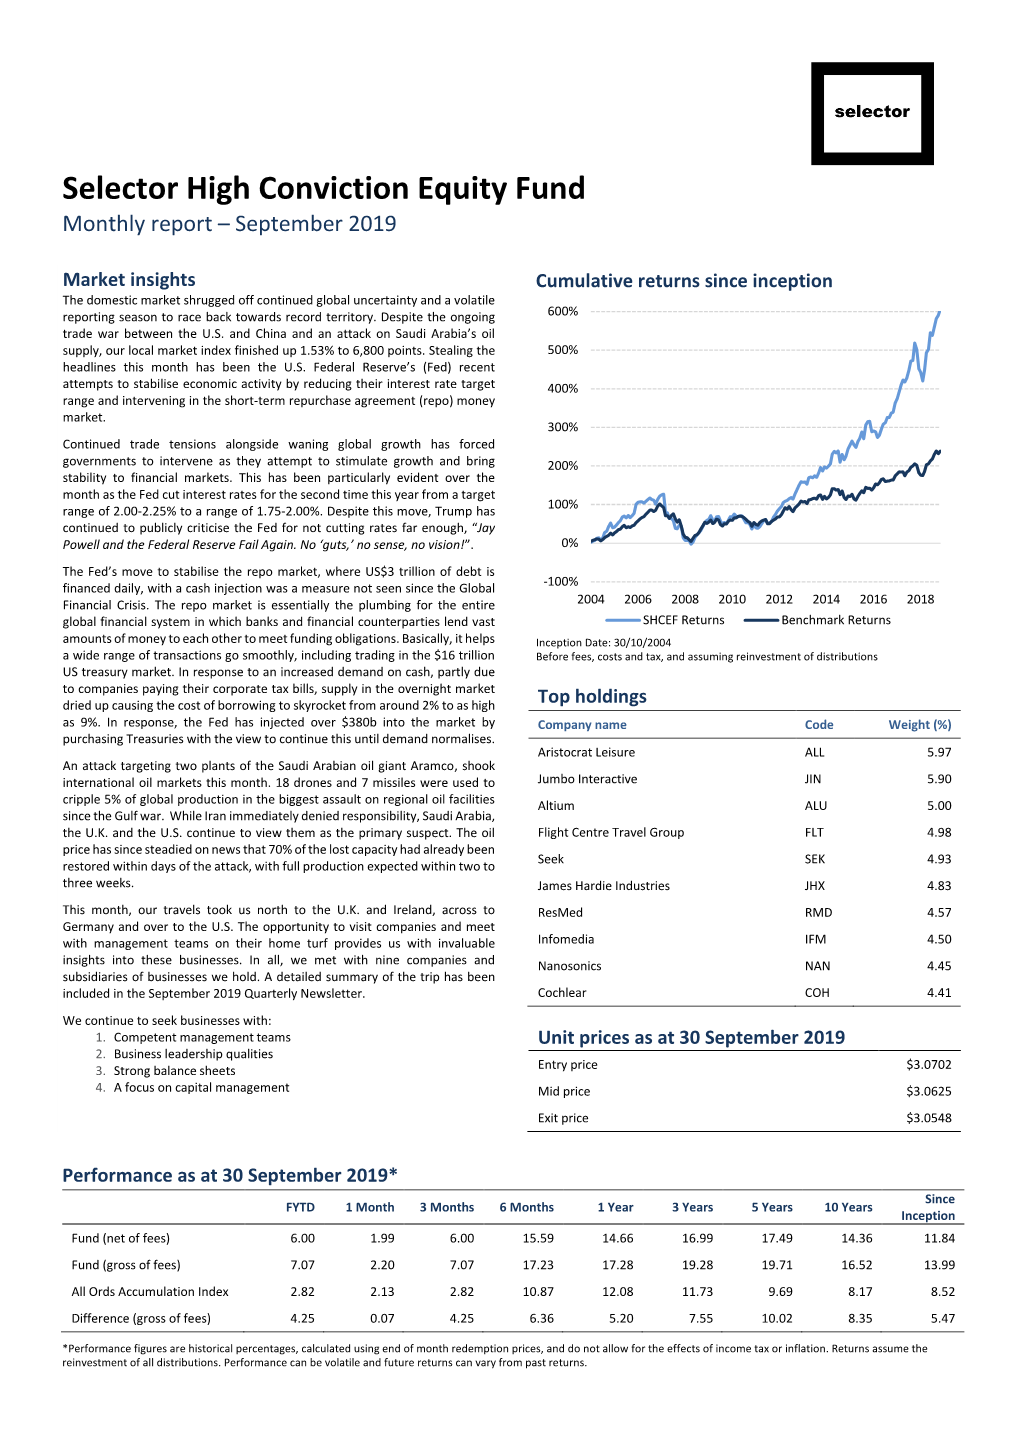 Selector High Conviction Equity Fund Monthly Report – September 2019